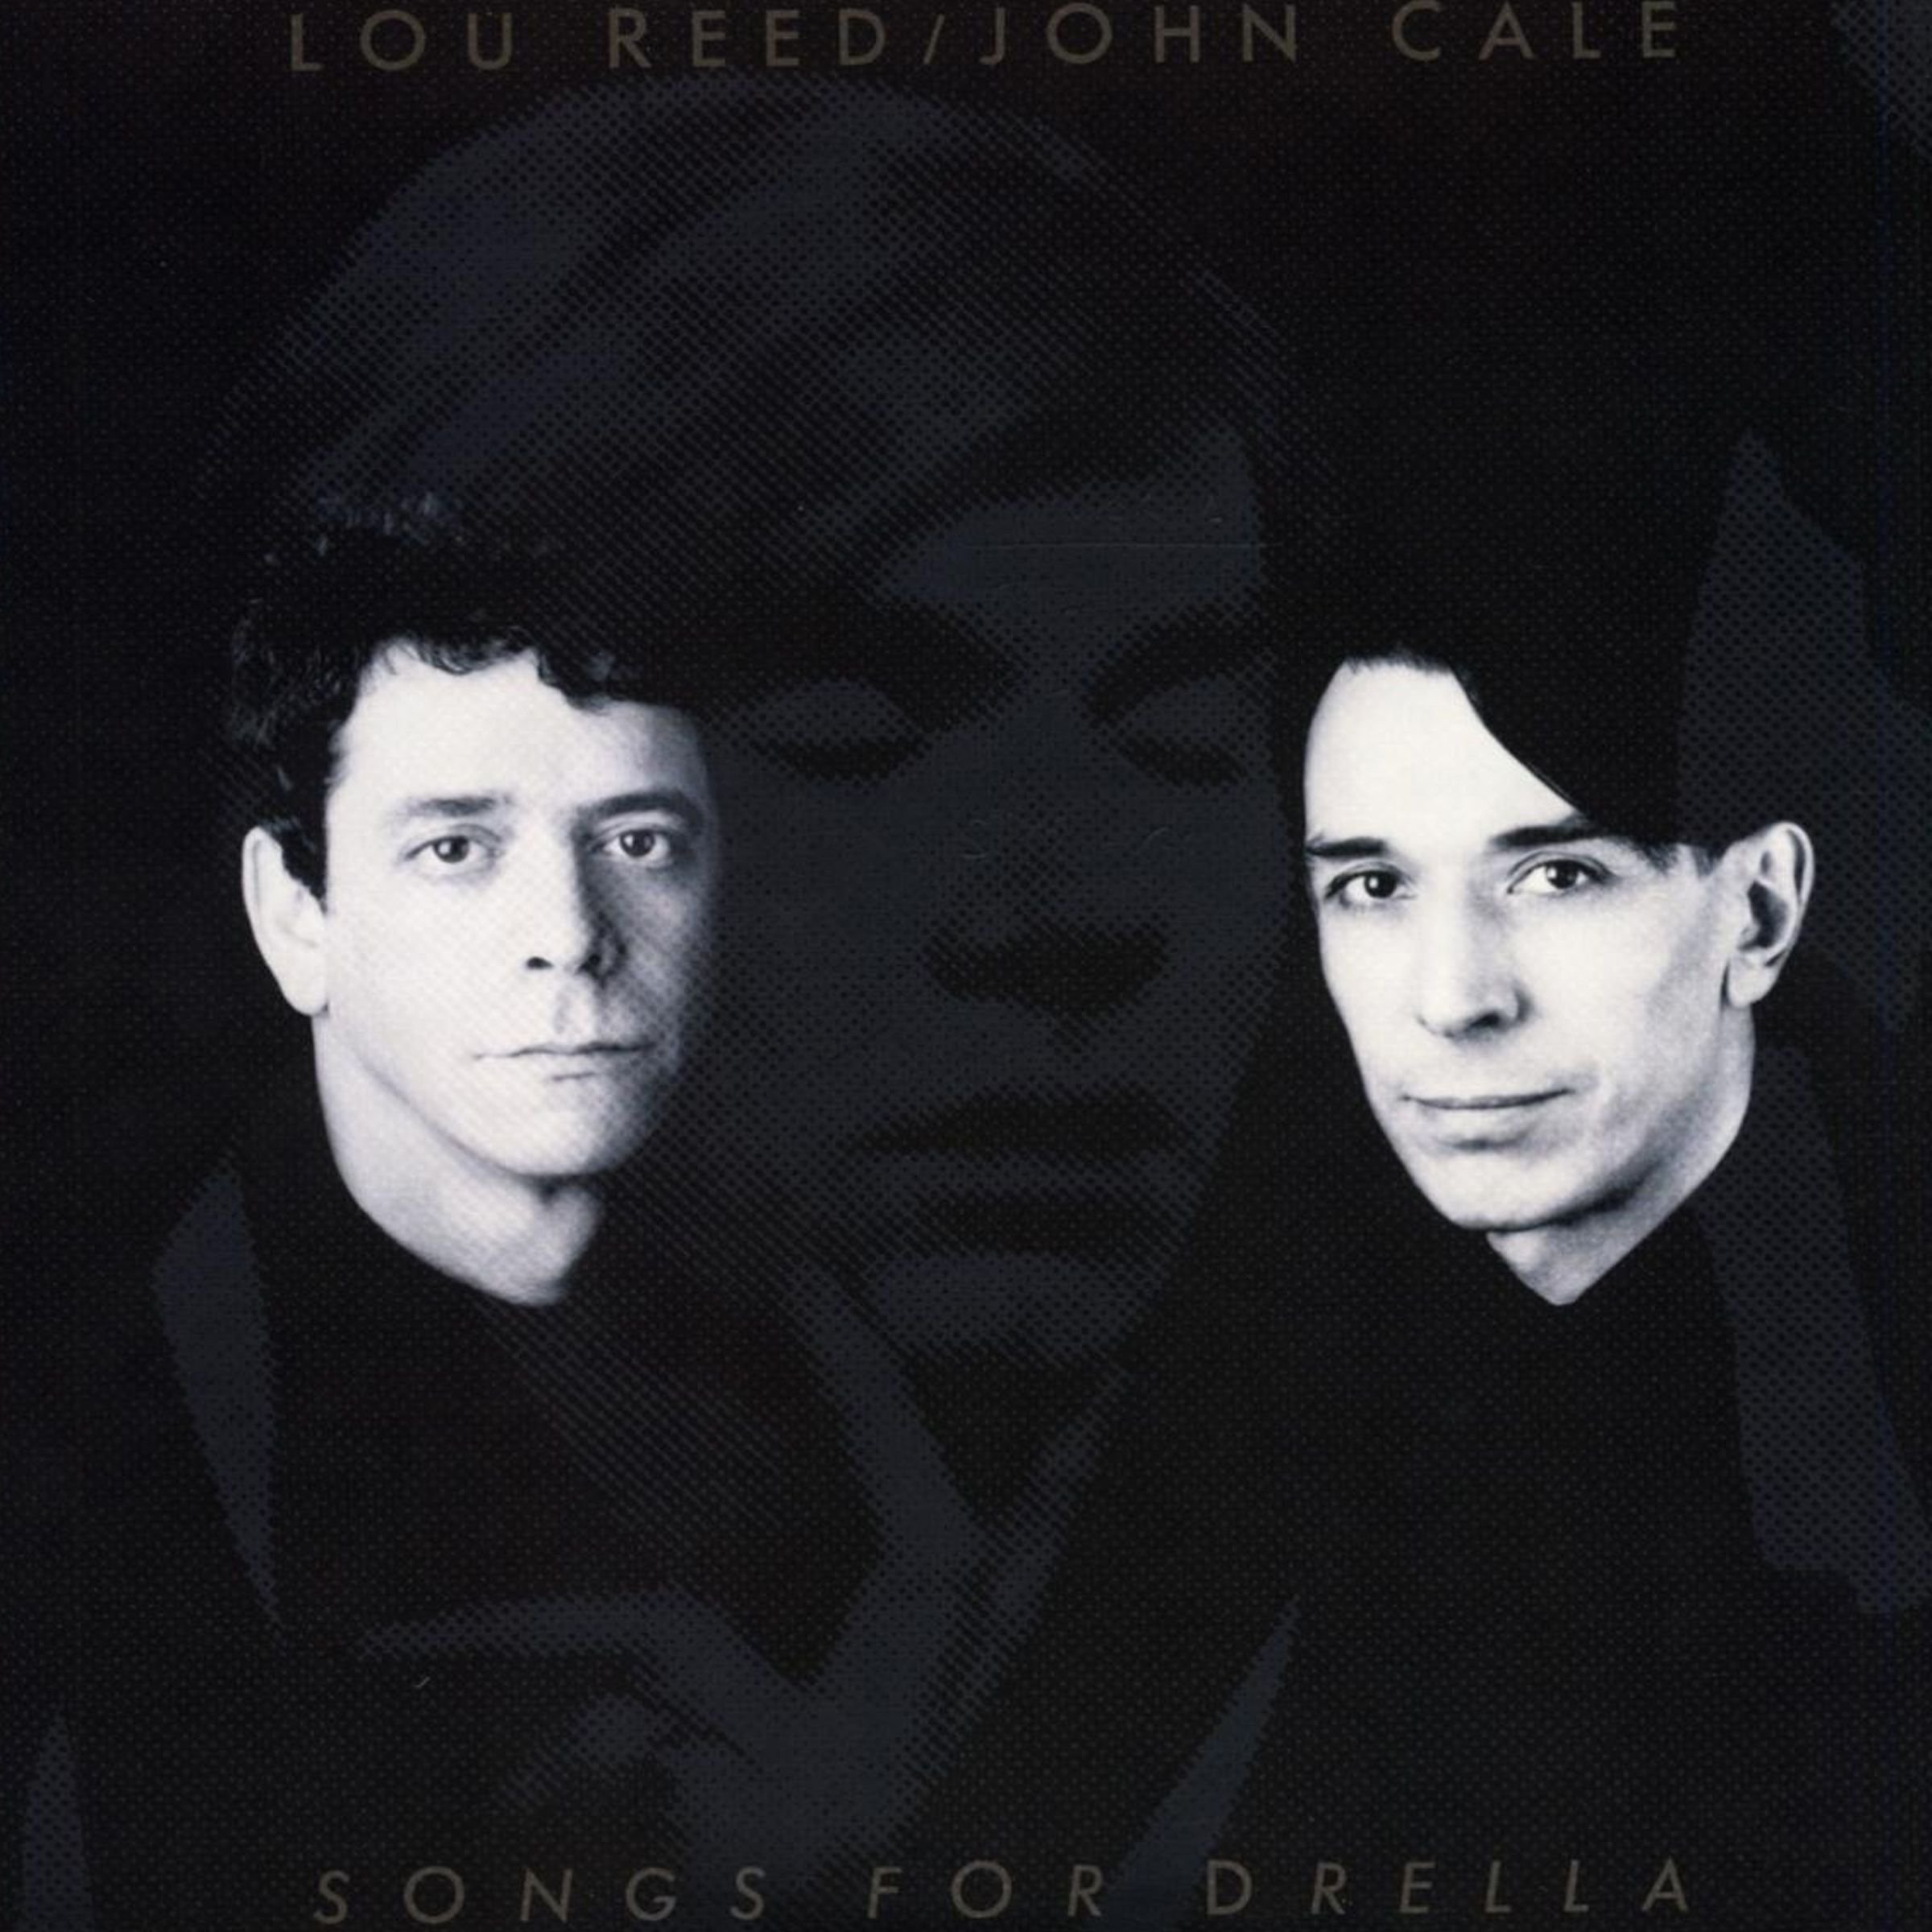 Lou Reed and John Cale-Songs For Drella-24-96-WEB-FLAC-REMASTERED-2015-OBZEN Download